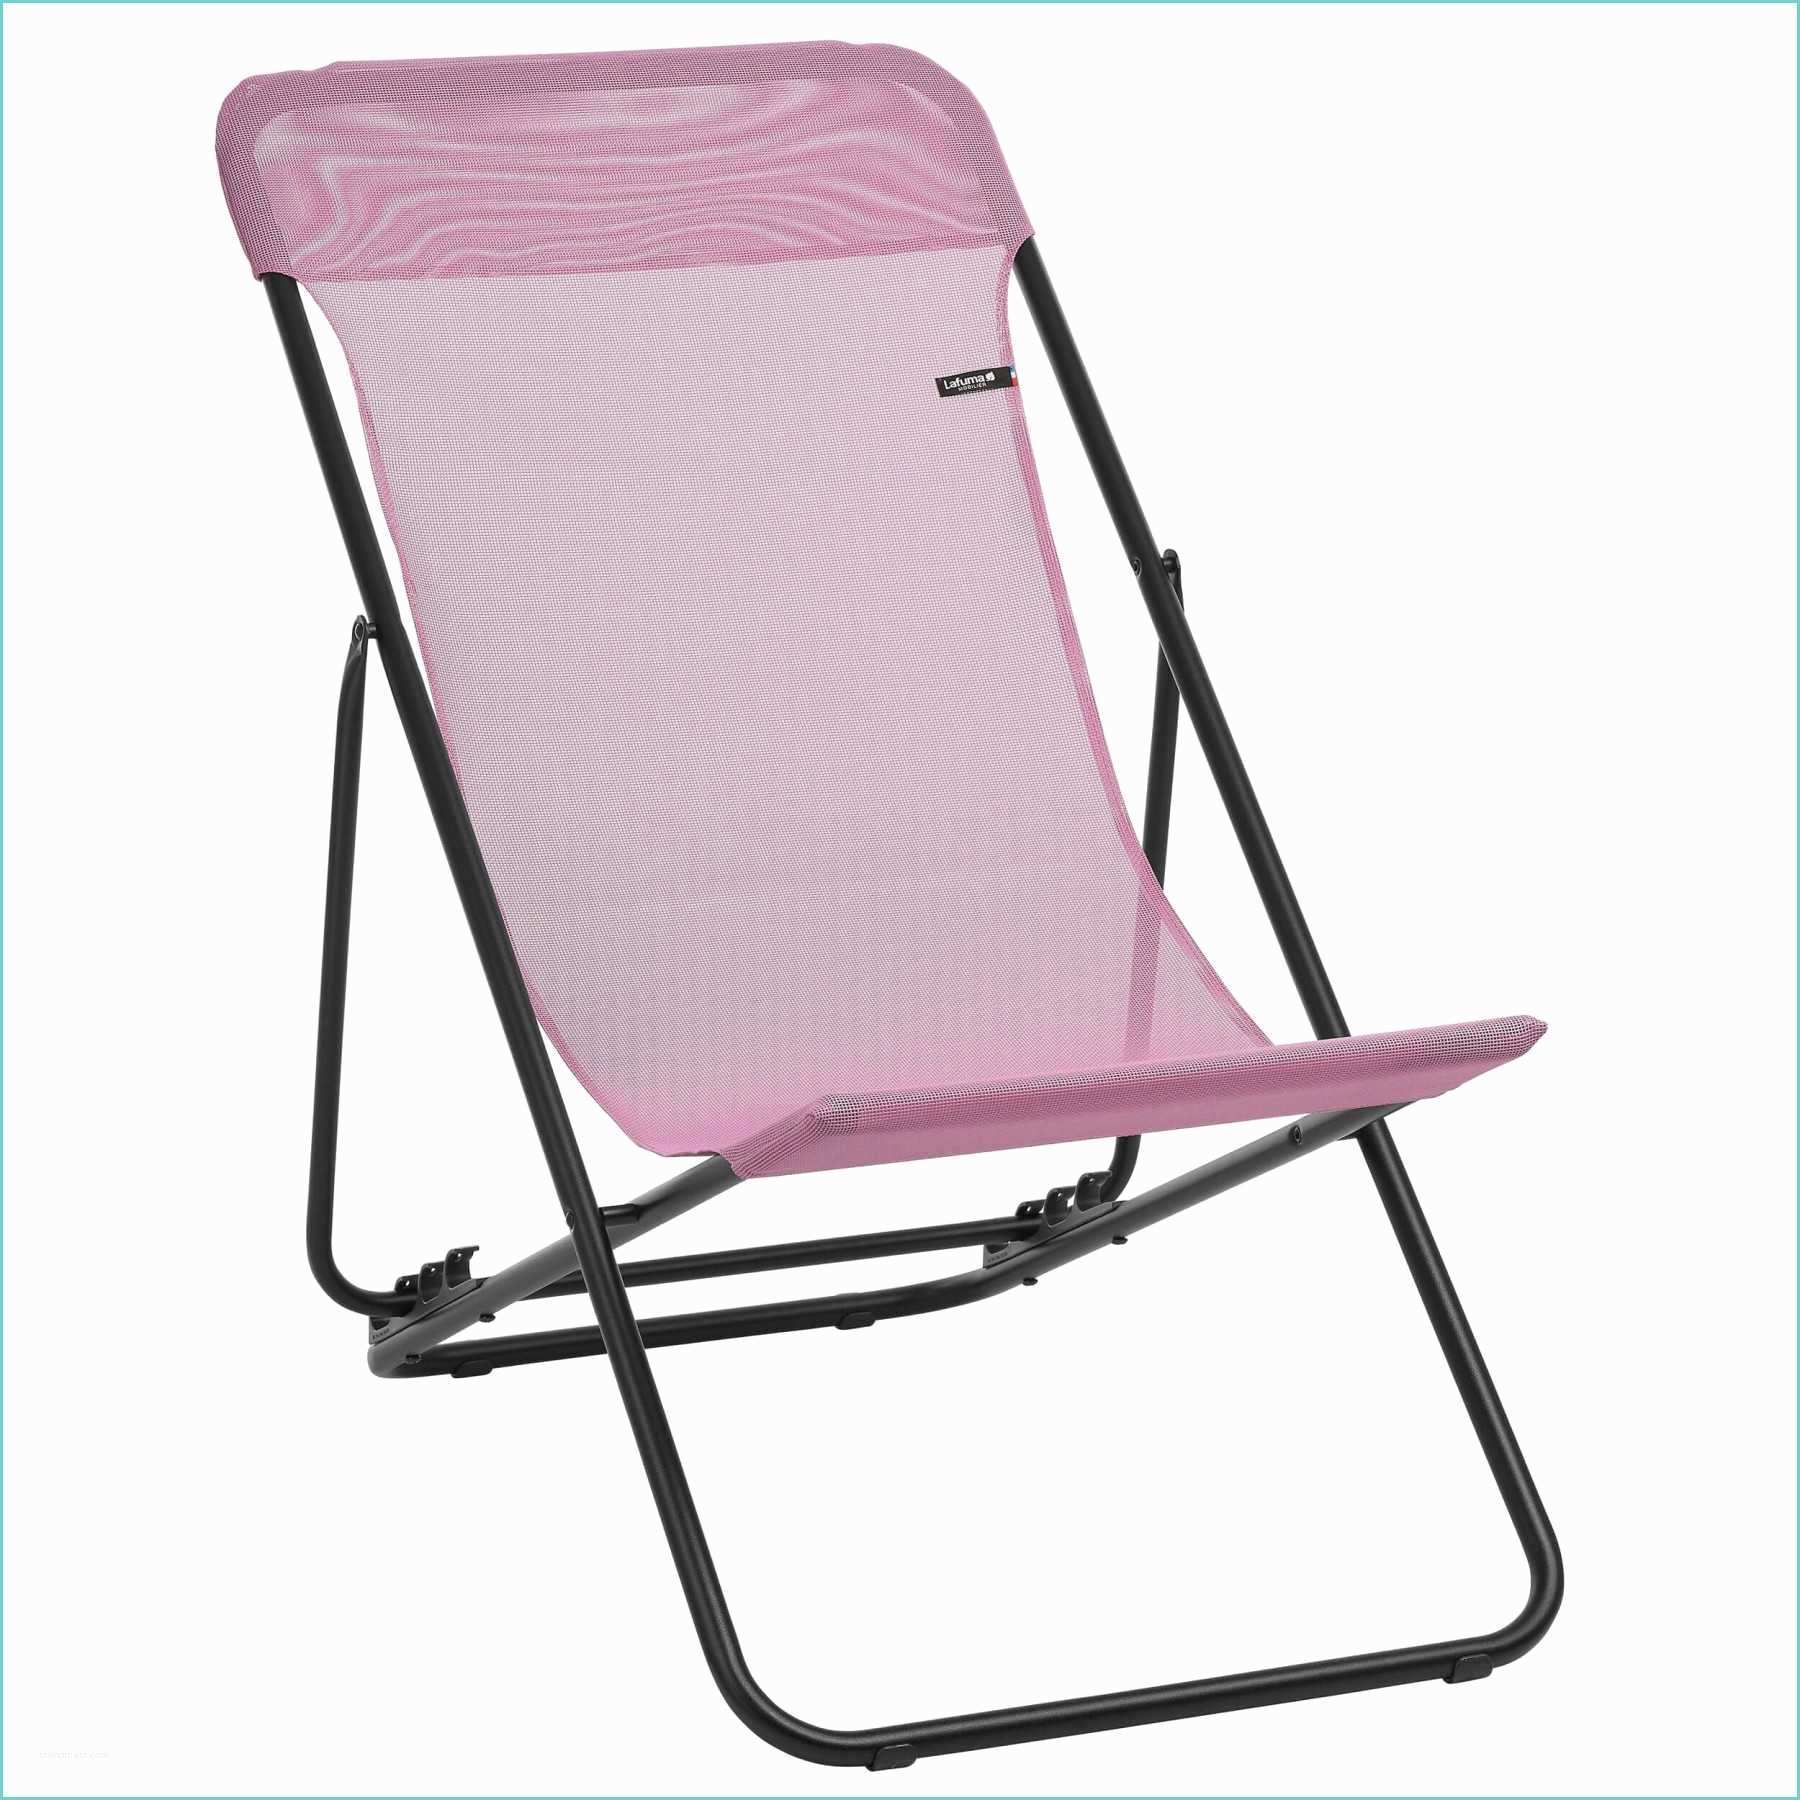 Chaise Relax Lafuma Chaises Relax Affordable Chaise Longue De Salon Relax